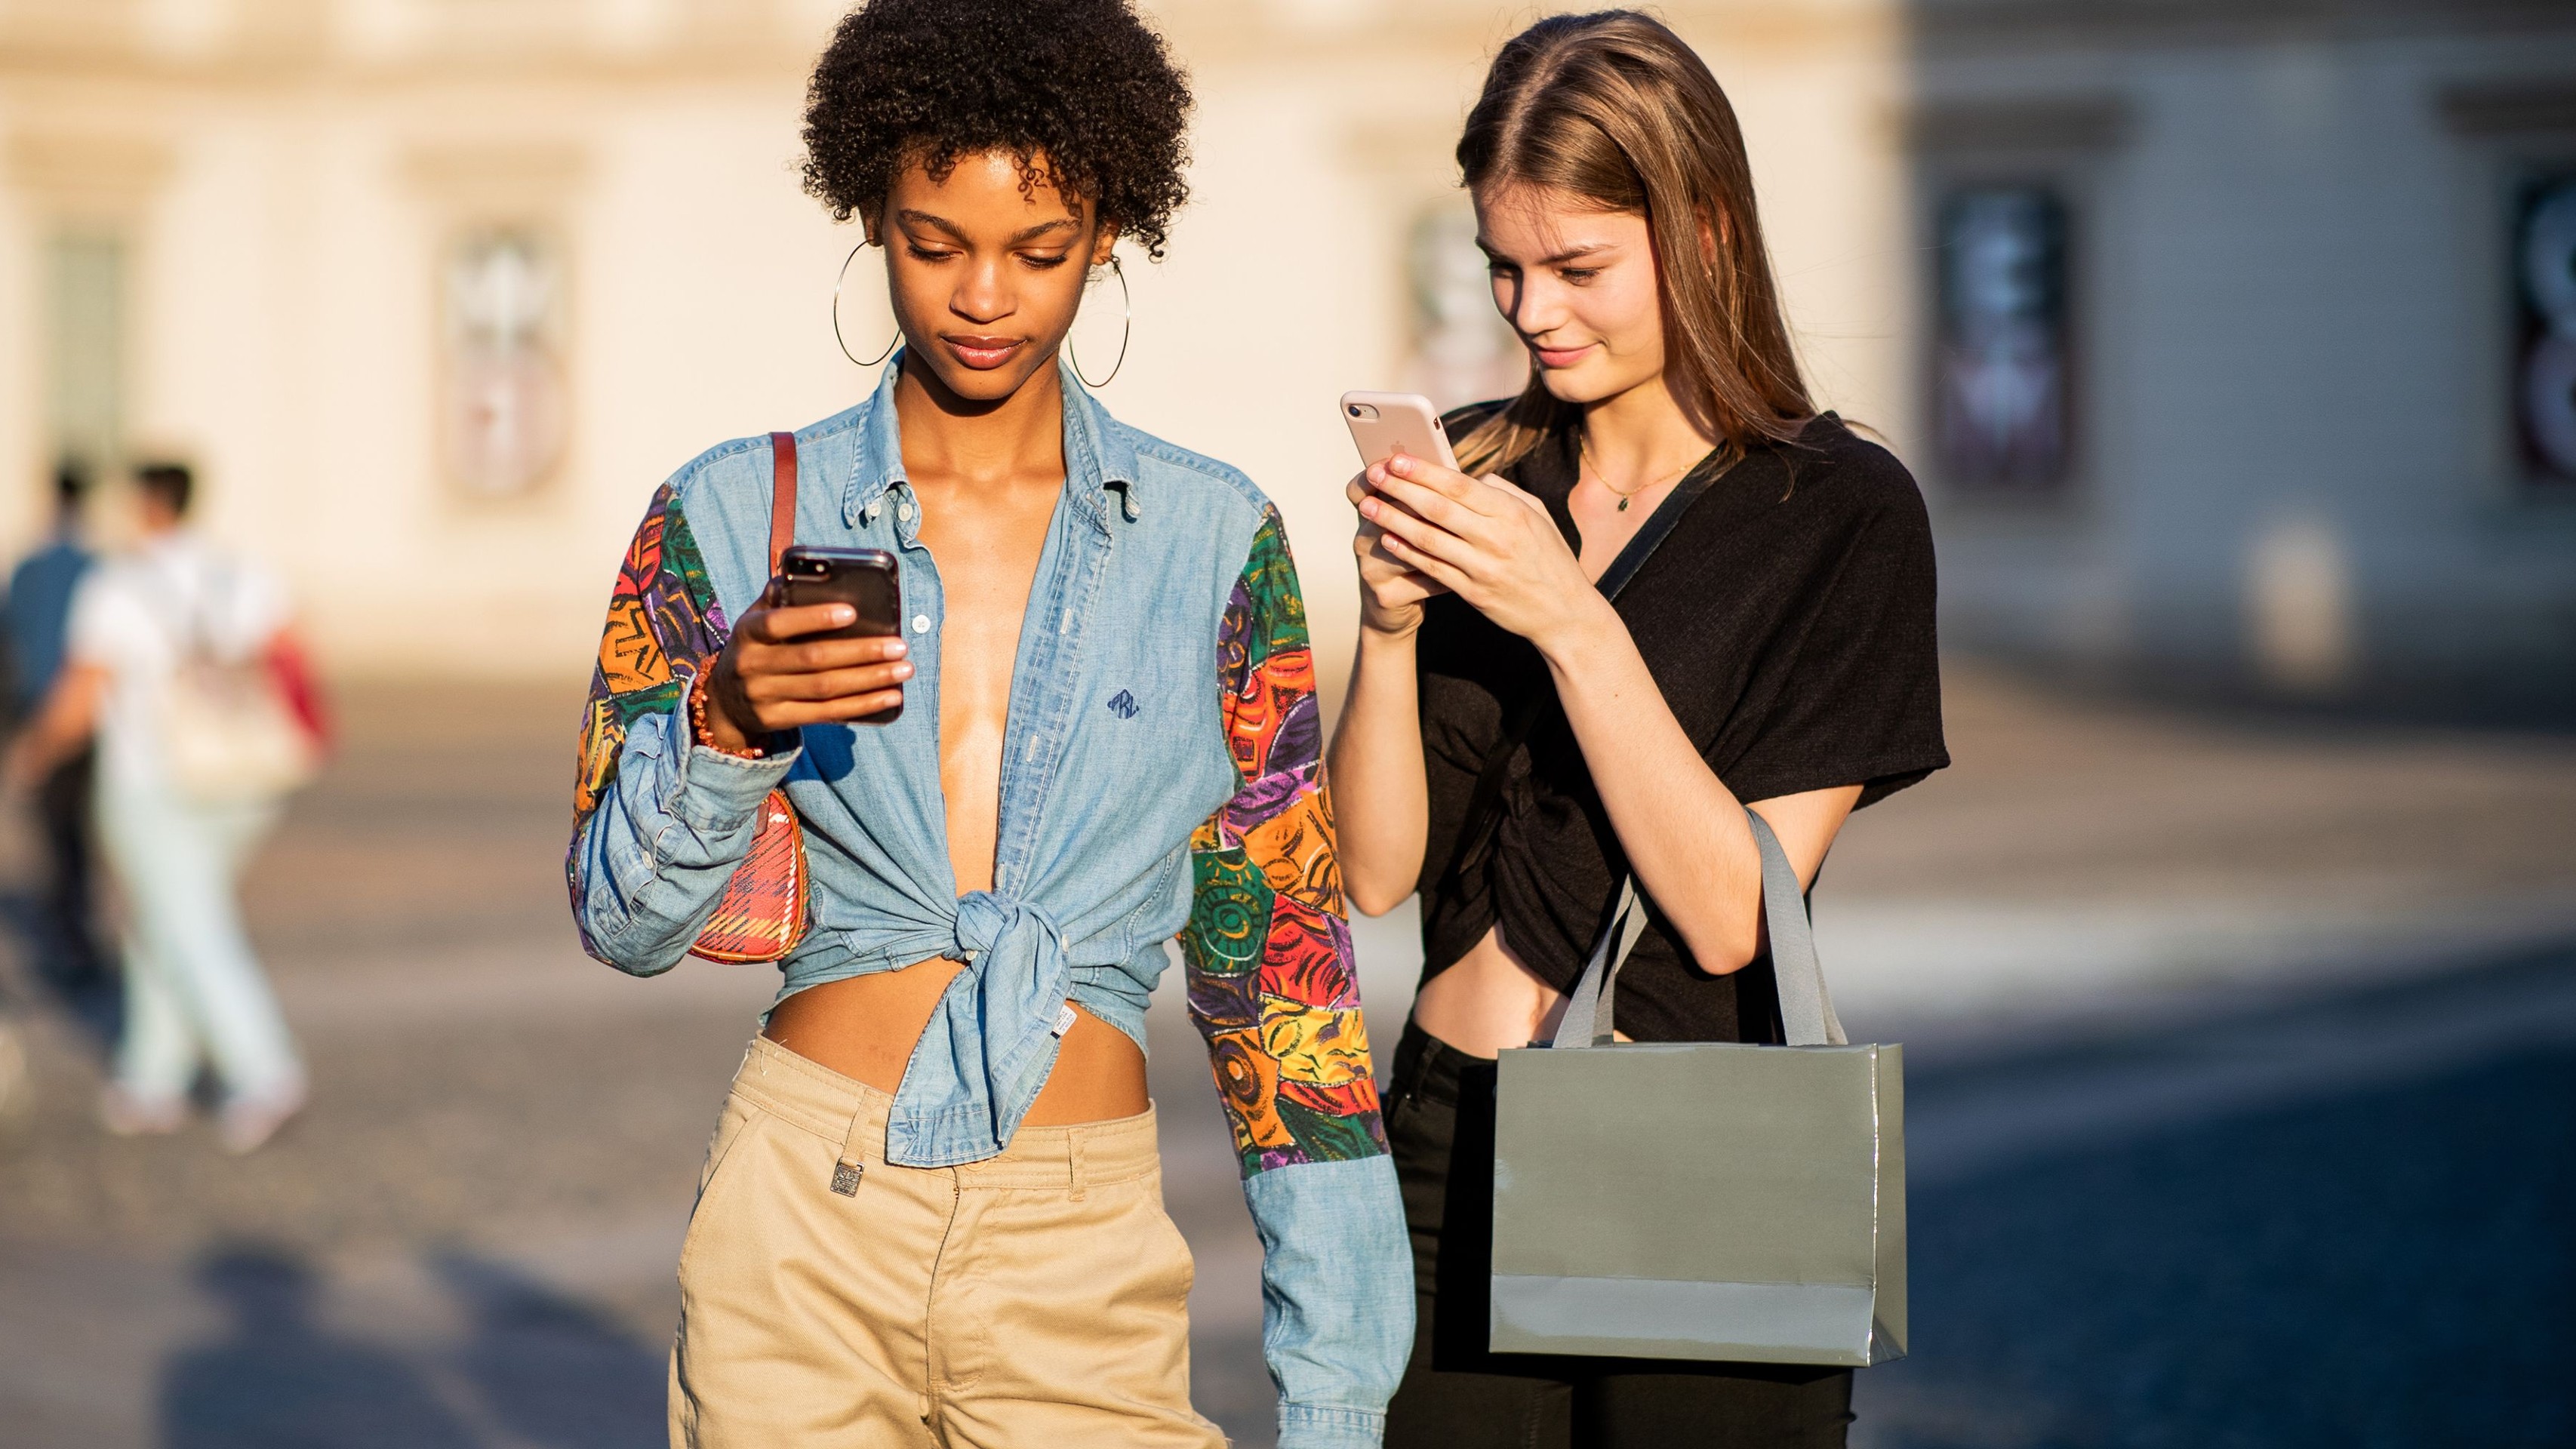 27 Best Shopping Apps 2023, Top Fashion and Home Apps